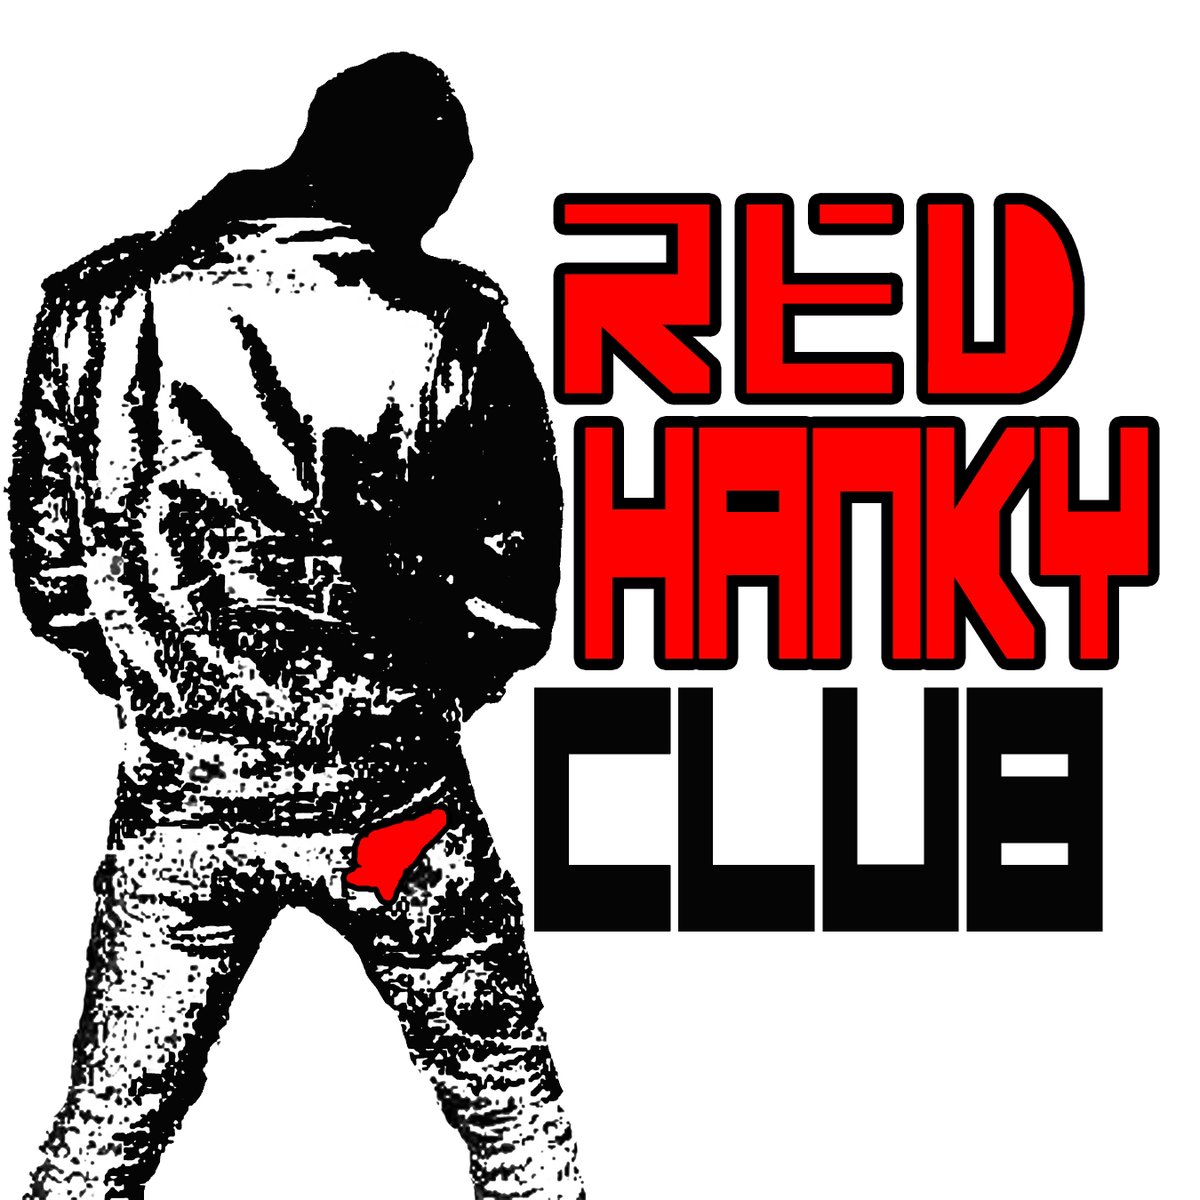 Tickets now on Sale for Sundays' event (Feb 18th) at 5pm. www. redhankyclub.com See you pigs there! Going to be at DEEP at CCBC for the fisting event March 1-3? Let me know! guys2.com for tix.